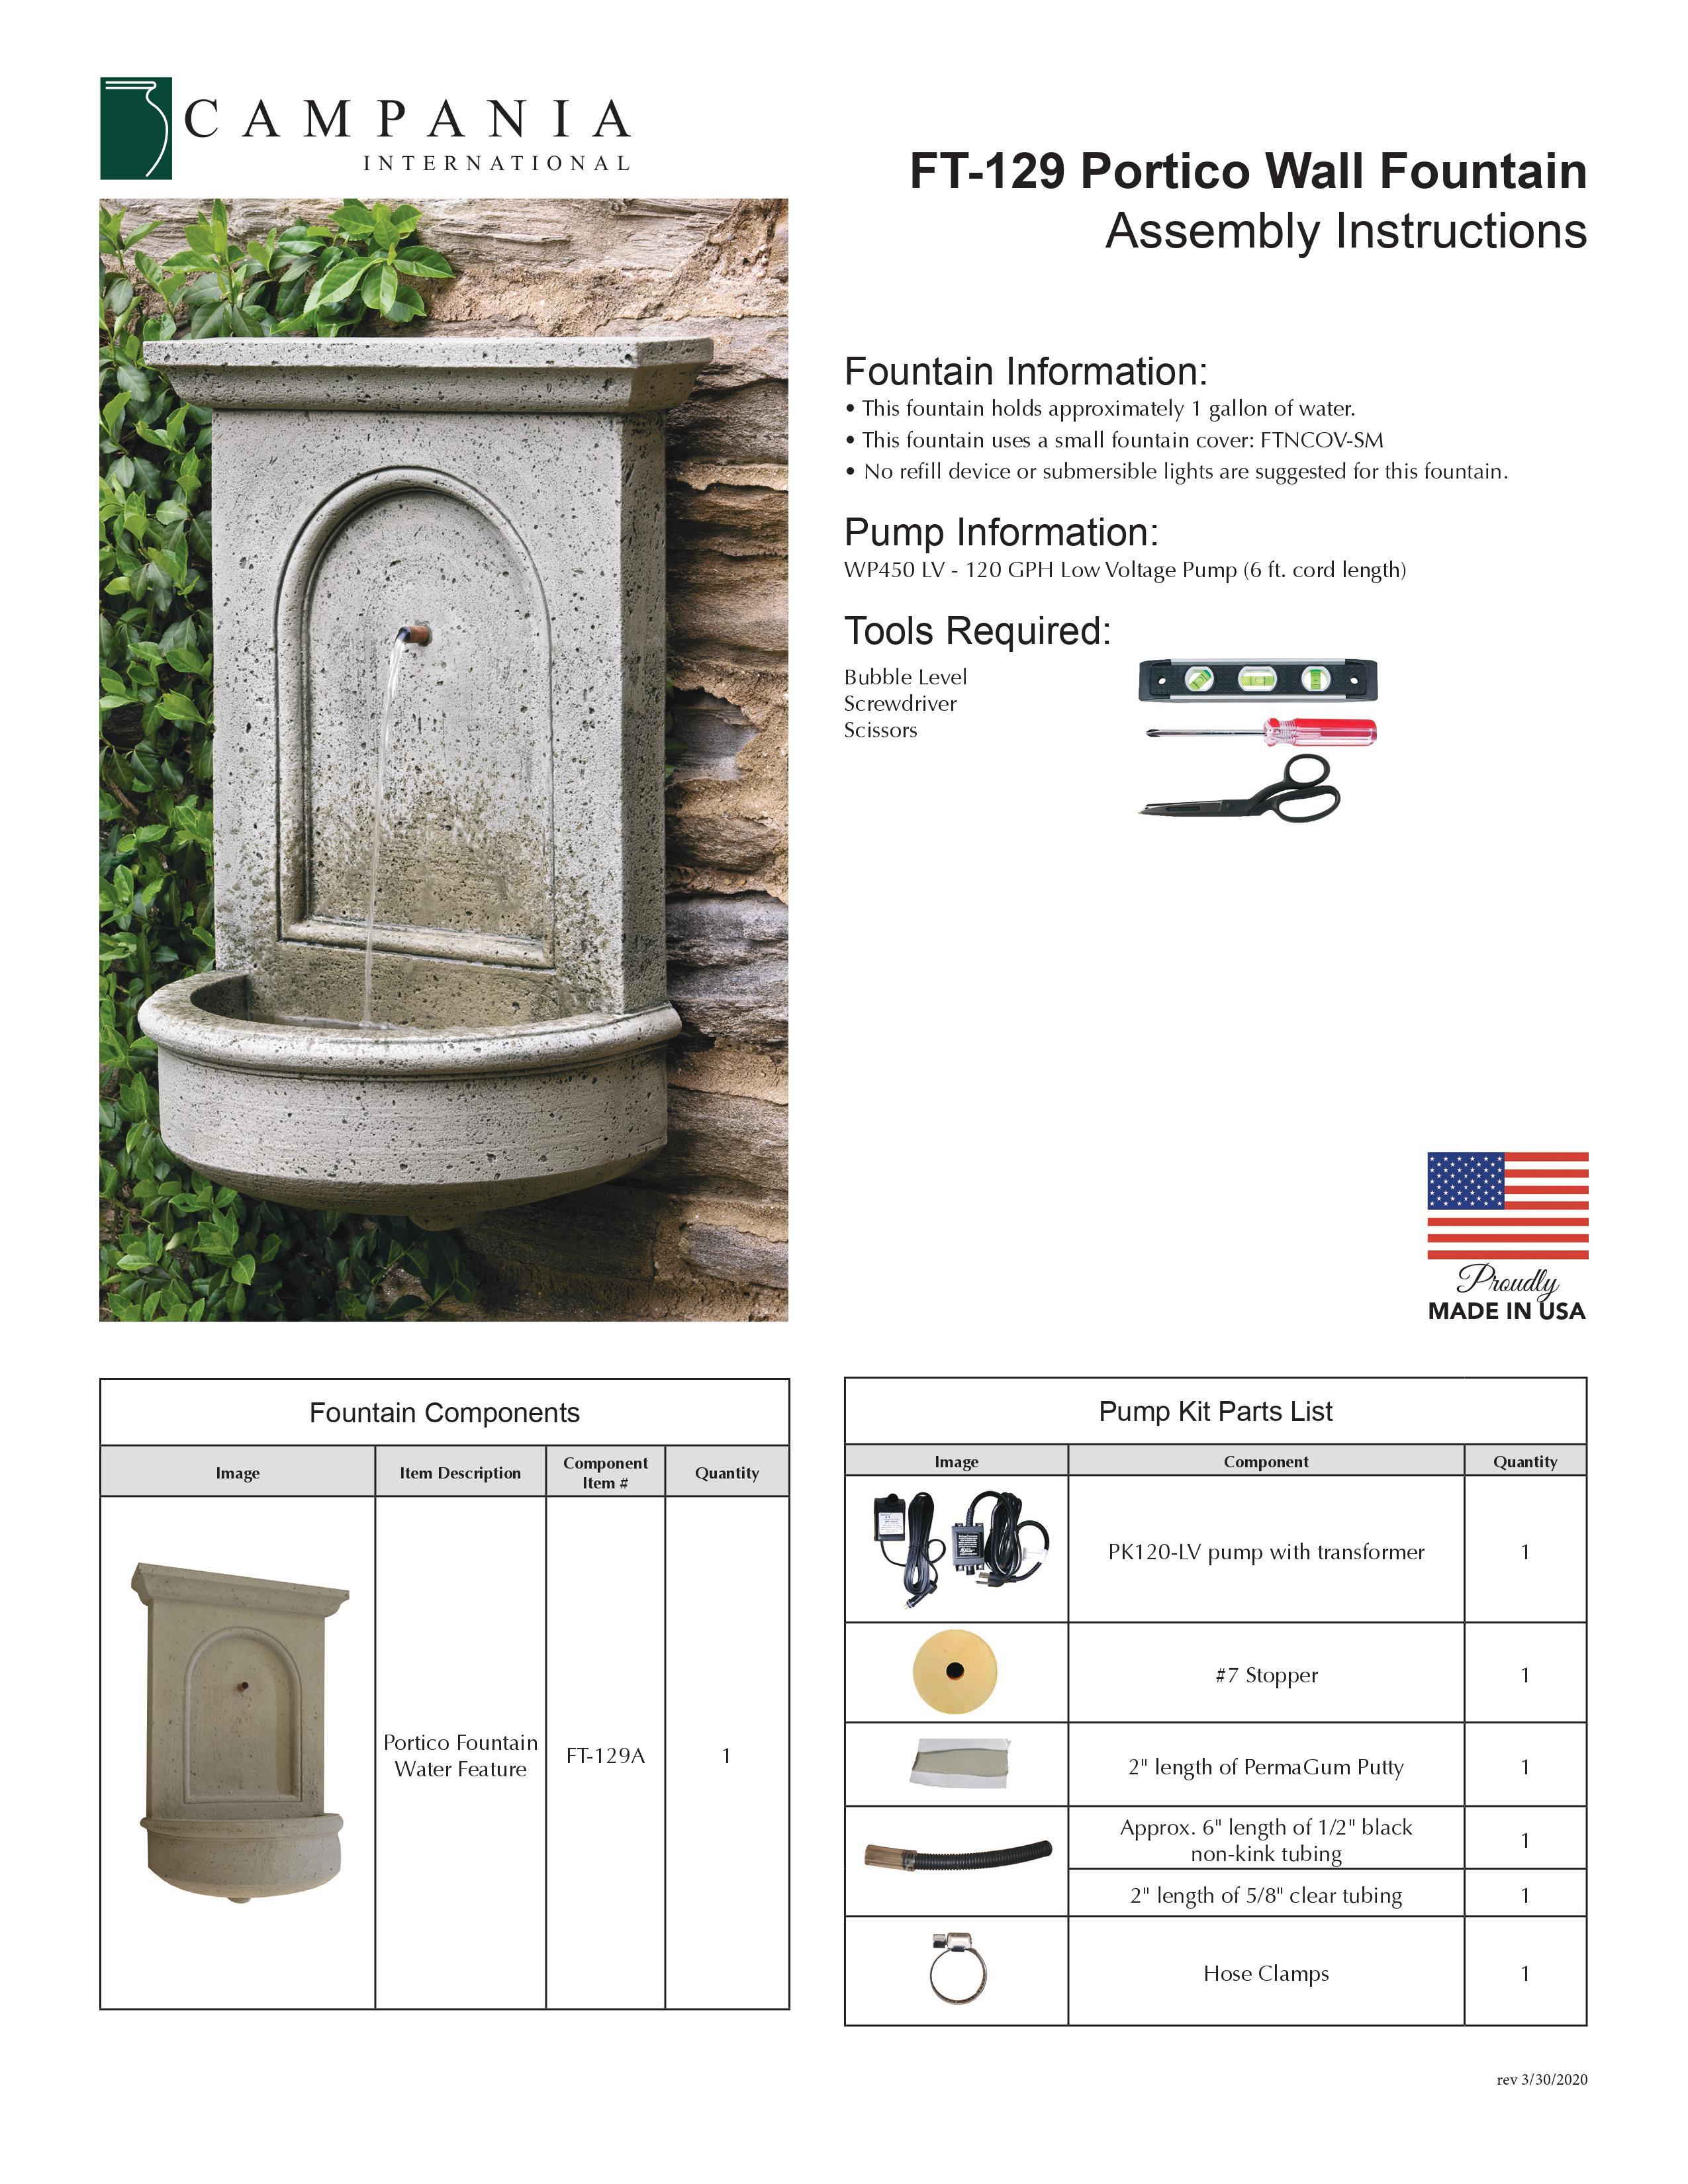 Portico Wall Outdoor Water Fountain